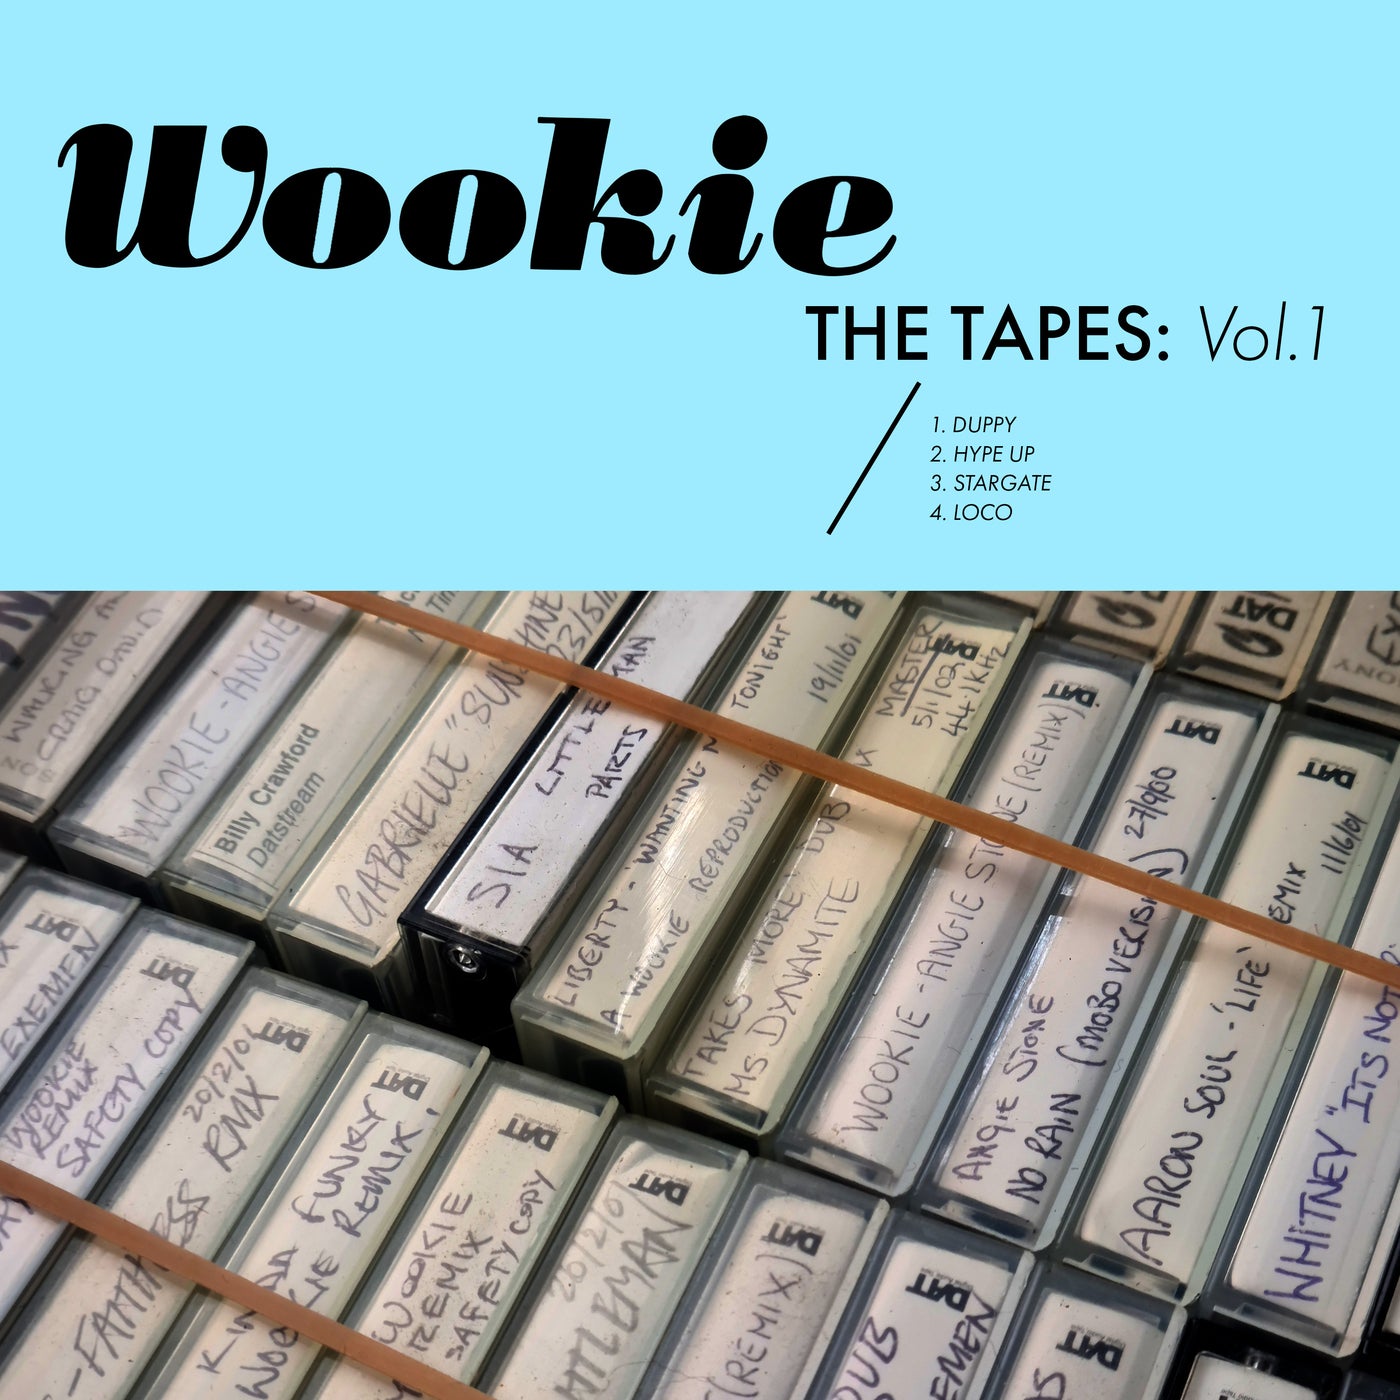 The Tapes Vol.1